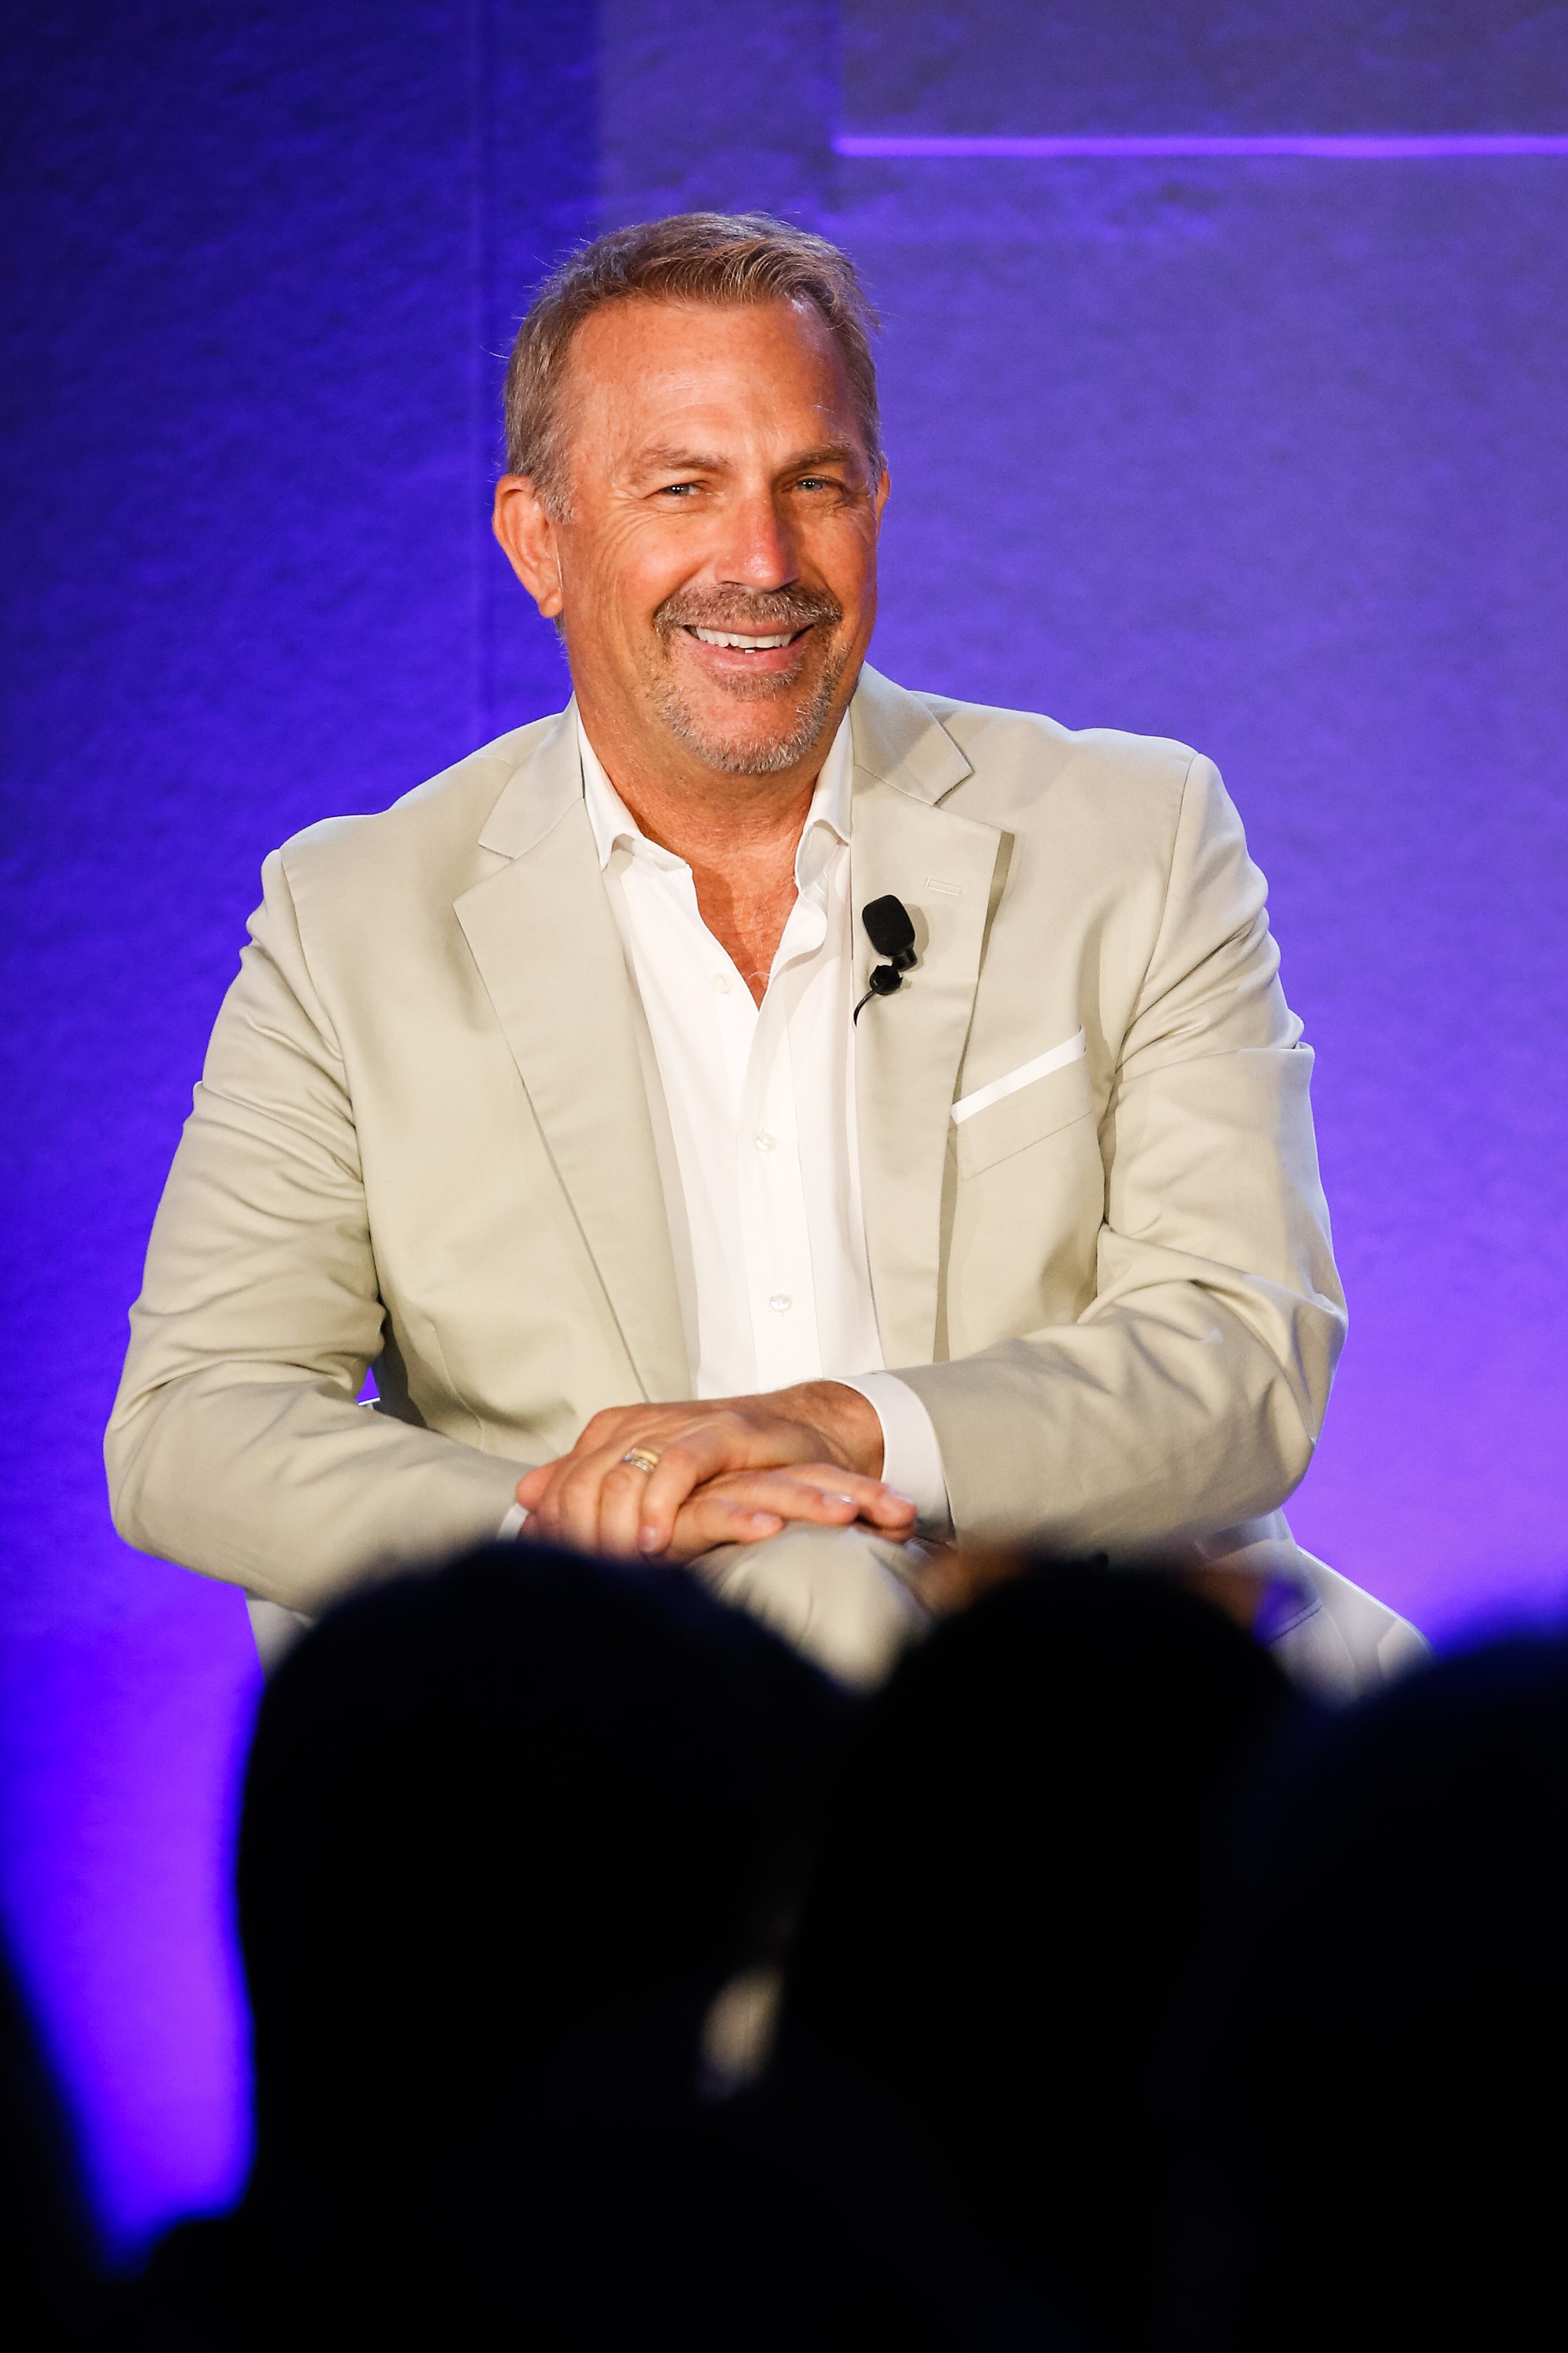 Kevin Costner at a panel during the Cannes Lions Festival 2018 on June 21, 2018 | Photo: GettyImages